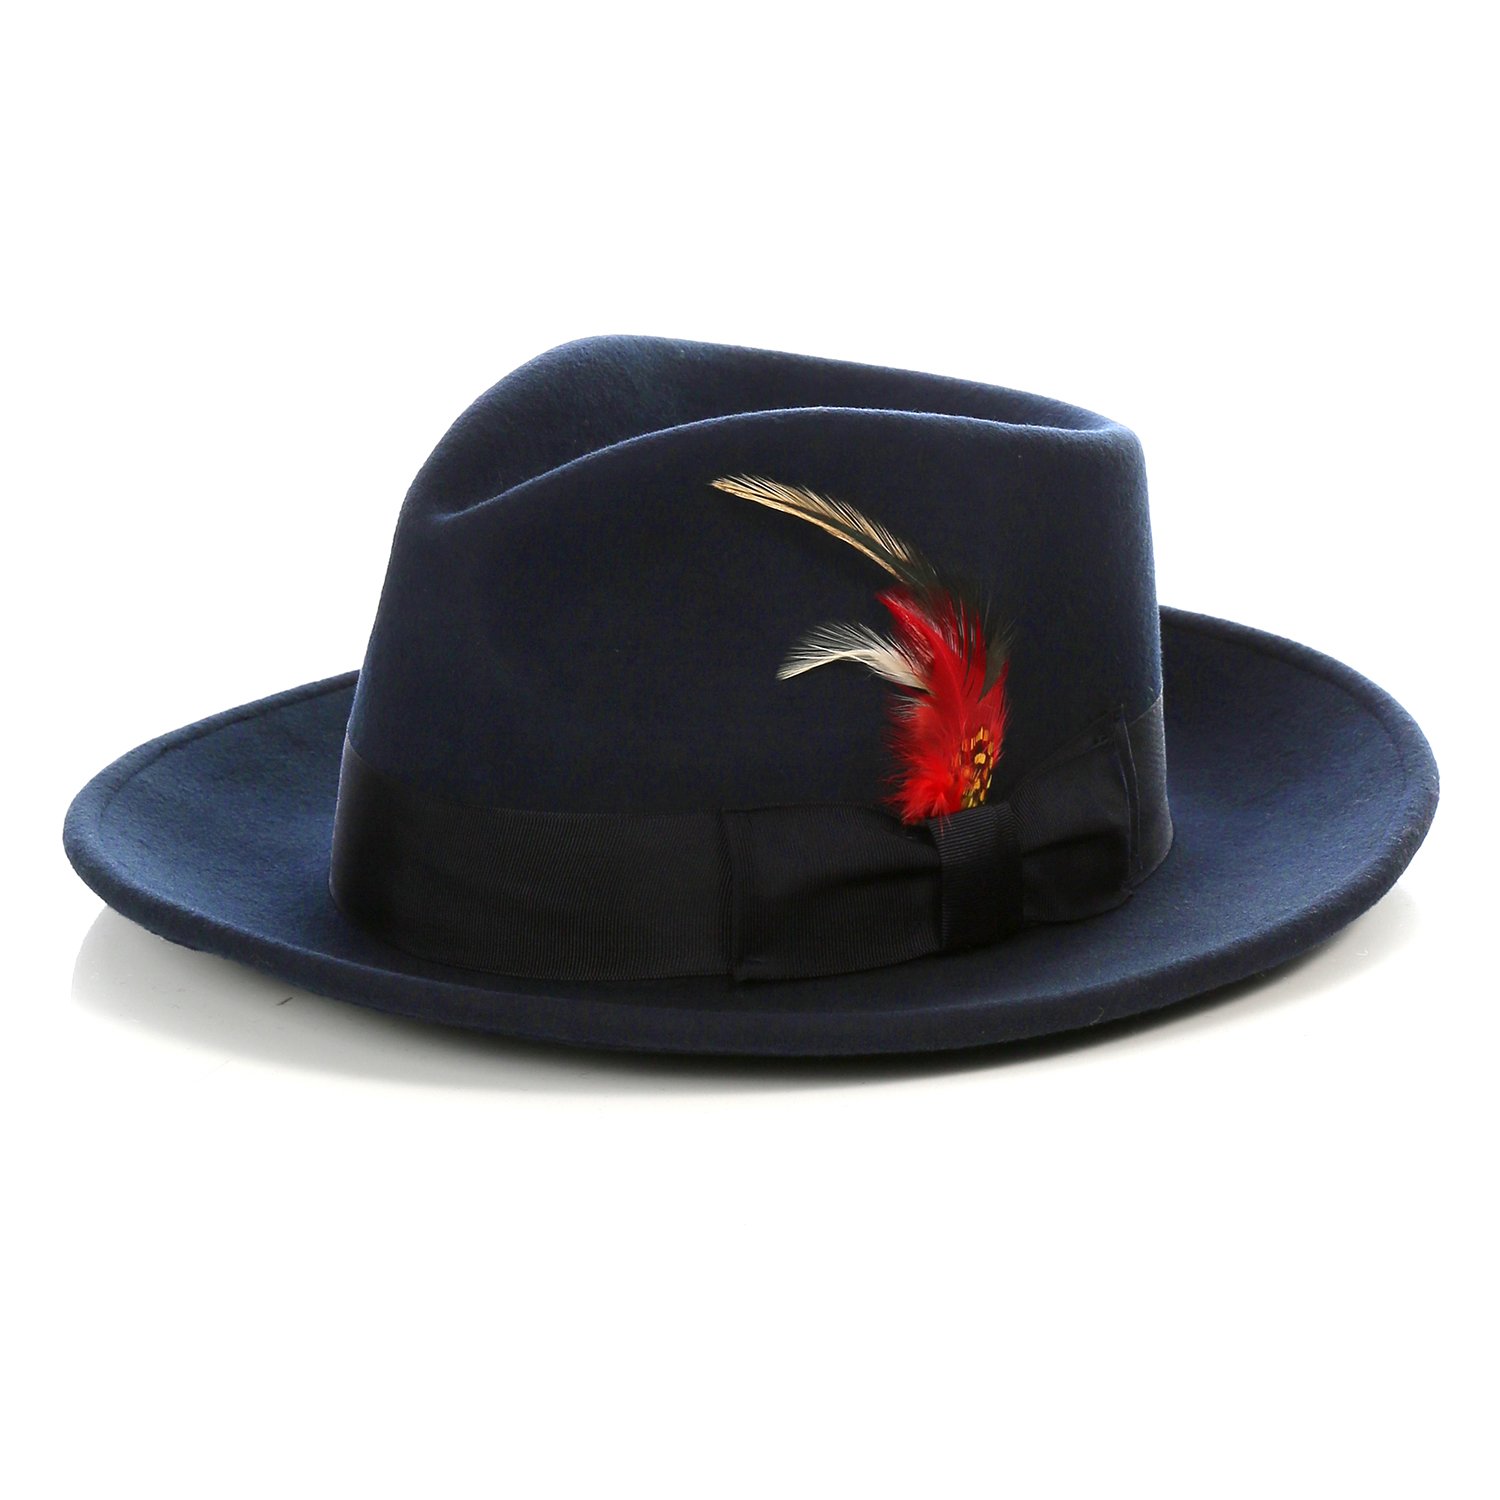 Ferrecci Navy Wool Crushable Fedora with Removable Feather - Unisex, Men’s, Women’s Traveler Hat (X-Large 61cm-7 5/8) - image 1 of 4